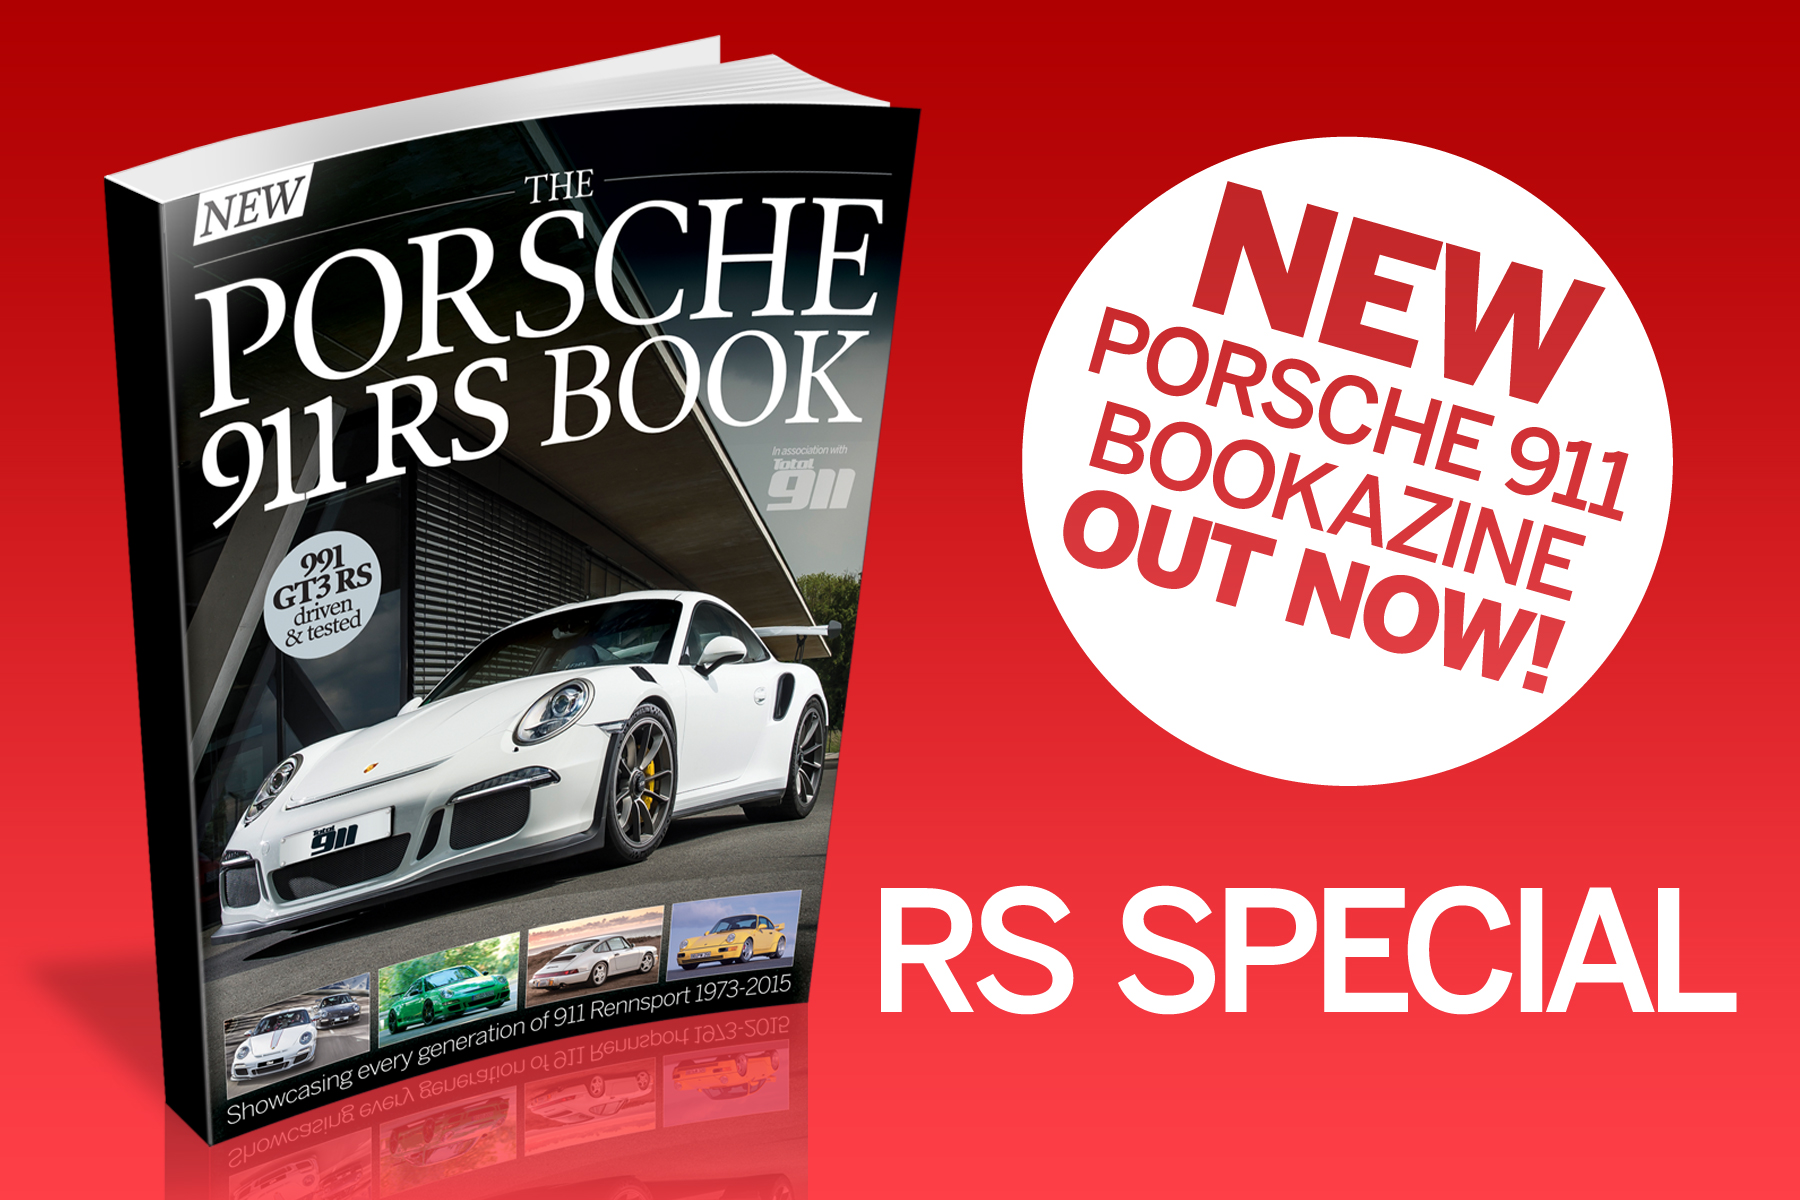 Volume 3 of the Porsche 911 RS bookazine out now - Total 911